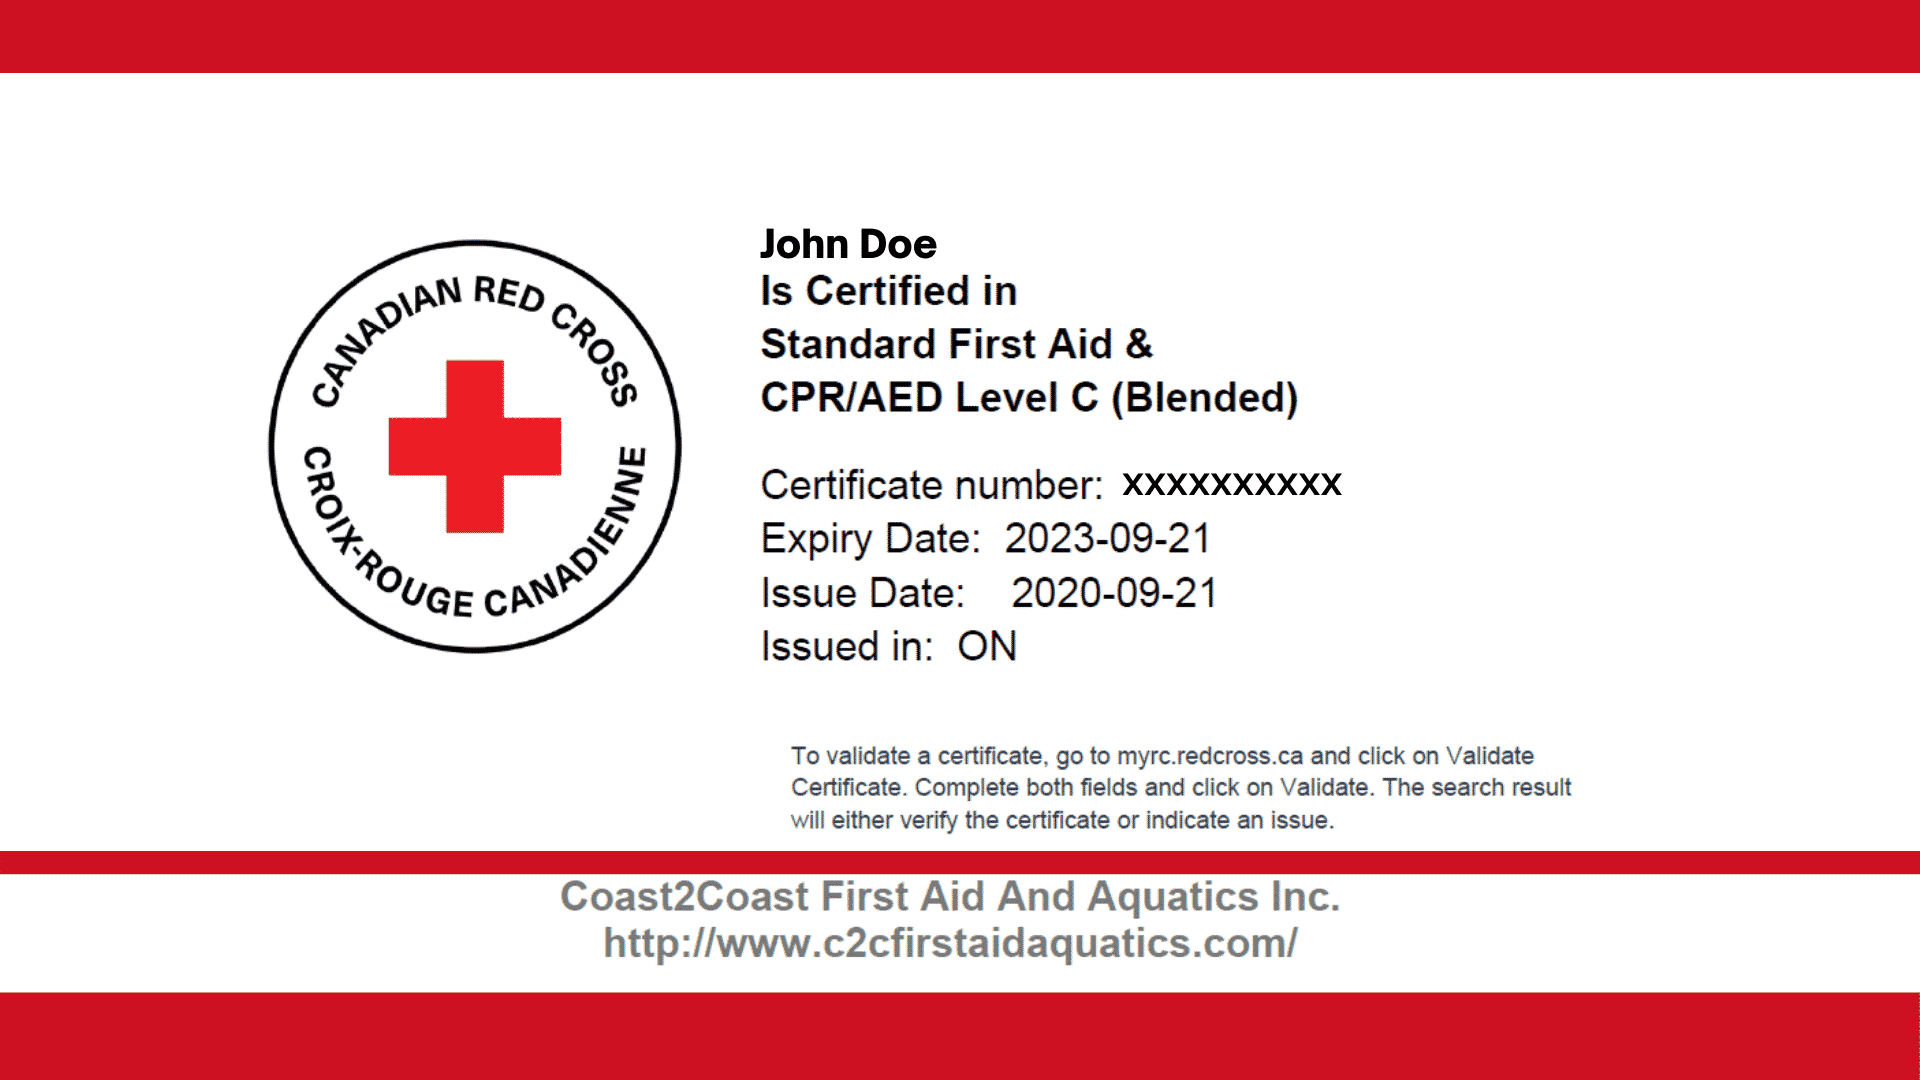 cpr-certified-red-cross-clearance-price-save-50-jlcatj-gob-mx